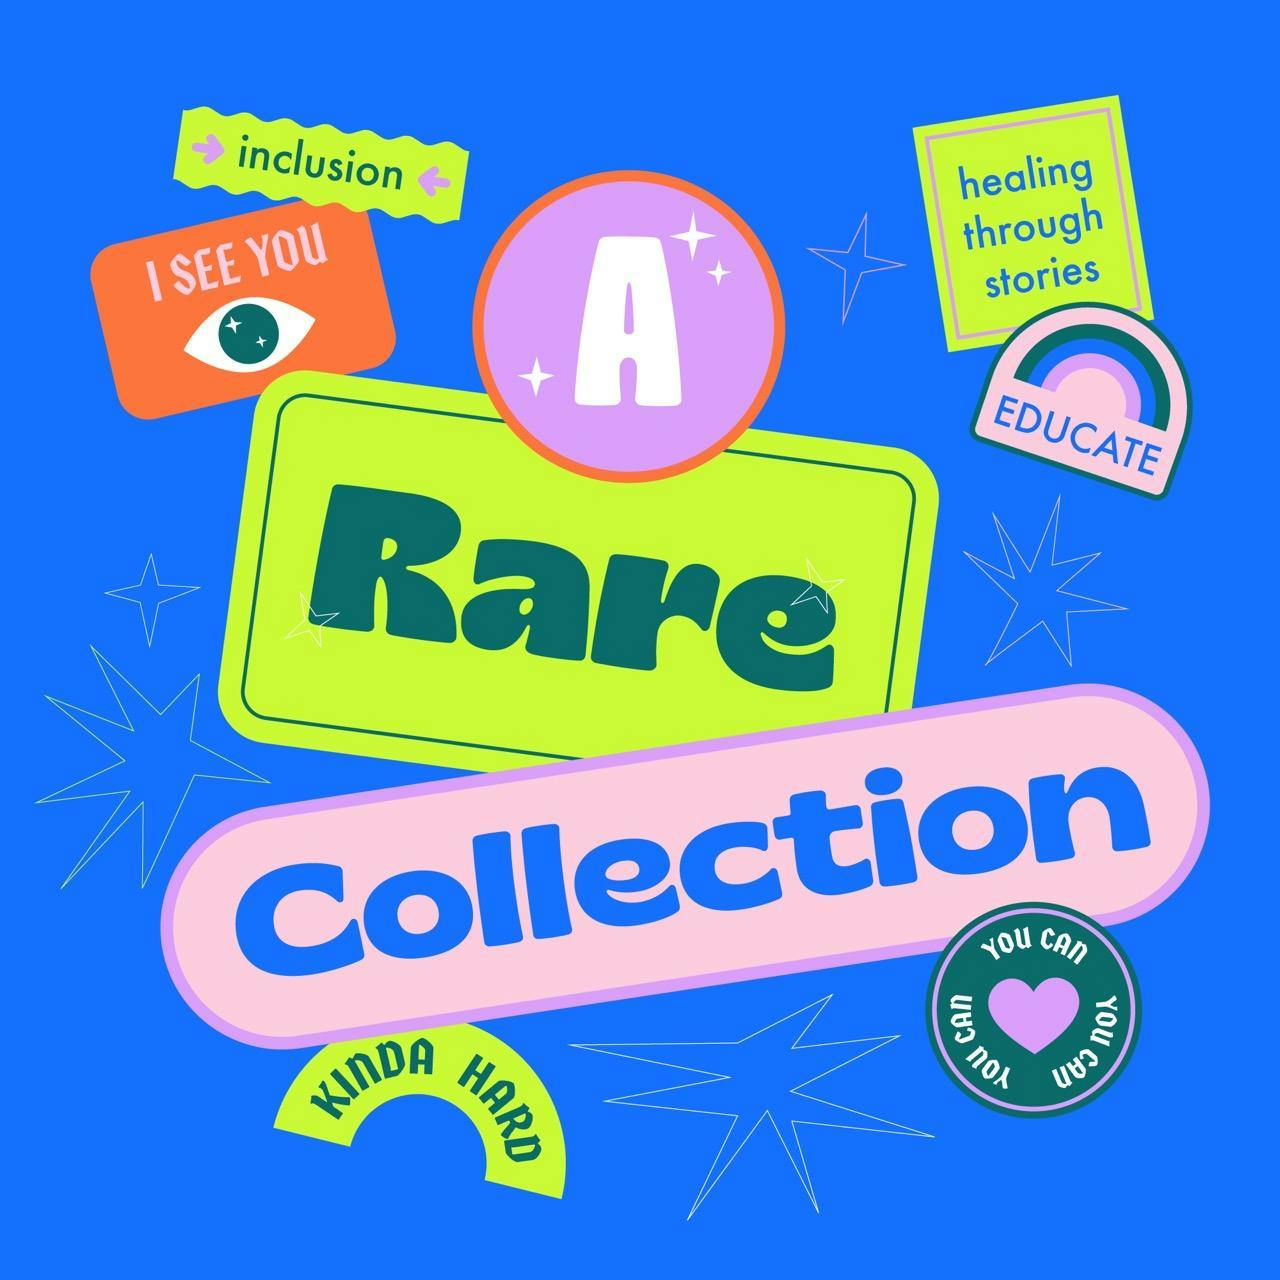 A Rare Collection – Rare Disease Storytelling with Kyle Bryant, Jennifer Siedman, Liz Morris and Ashley Fortney Point